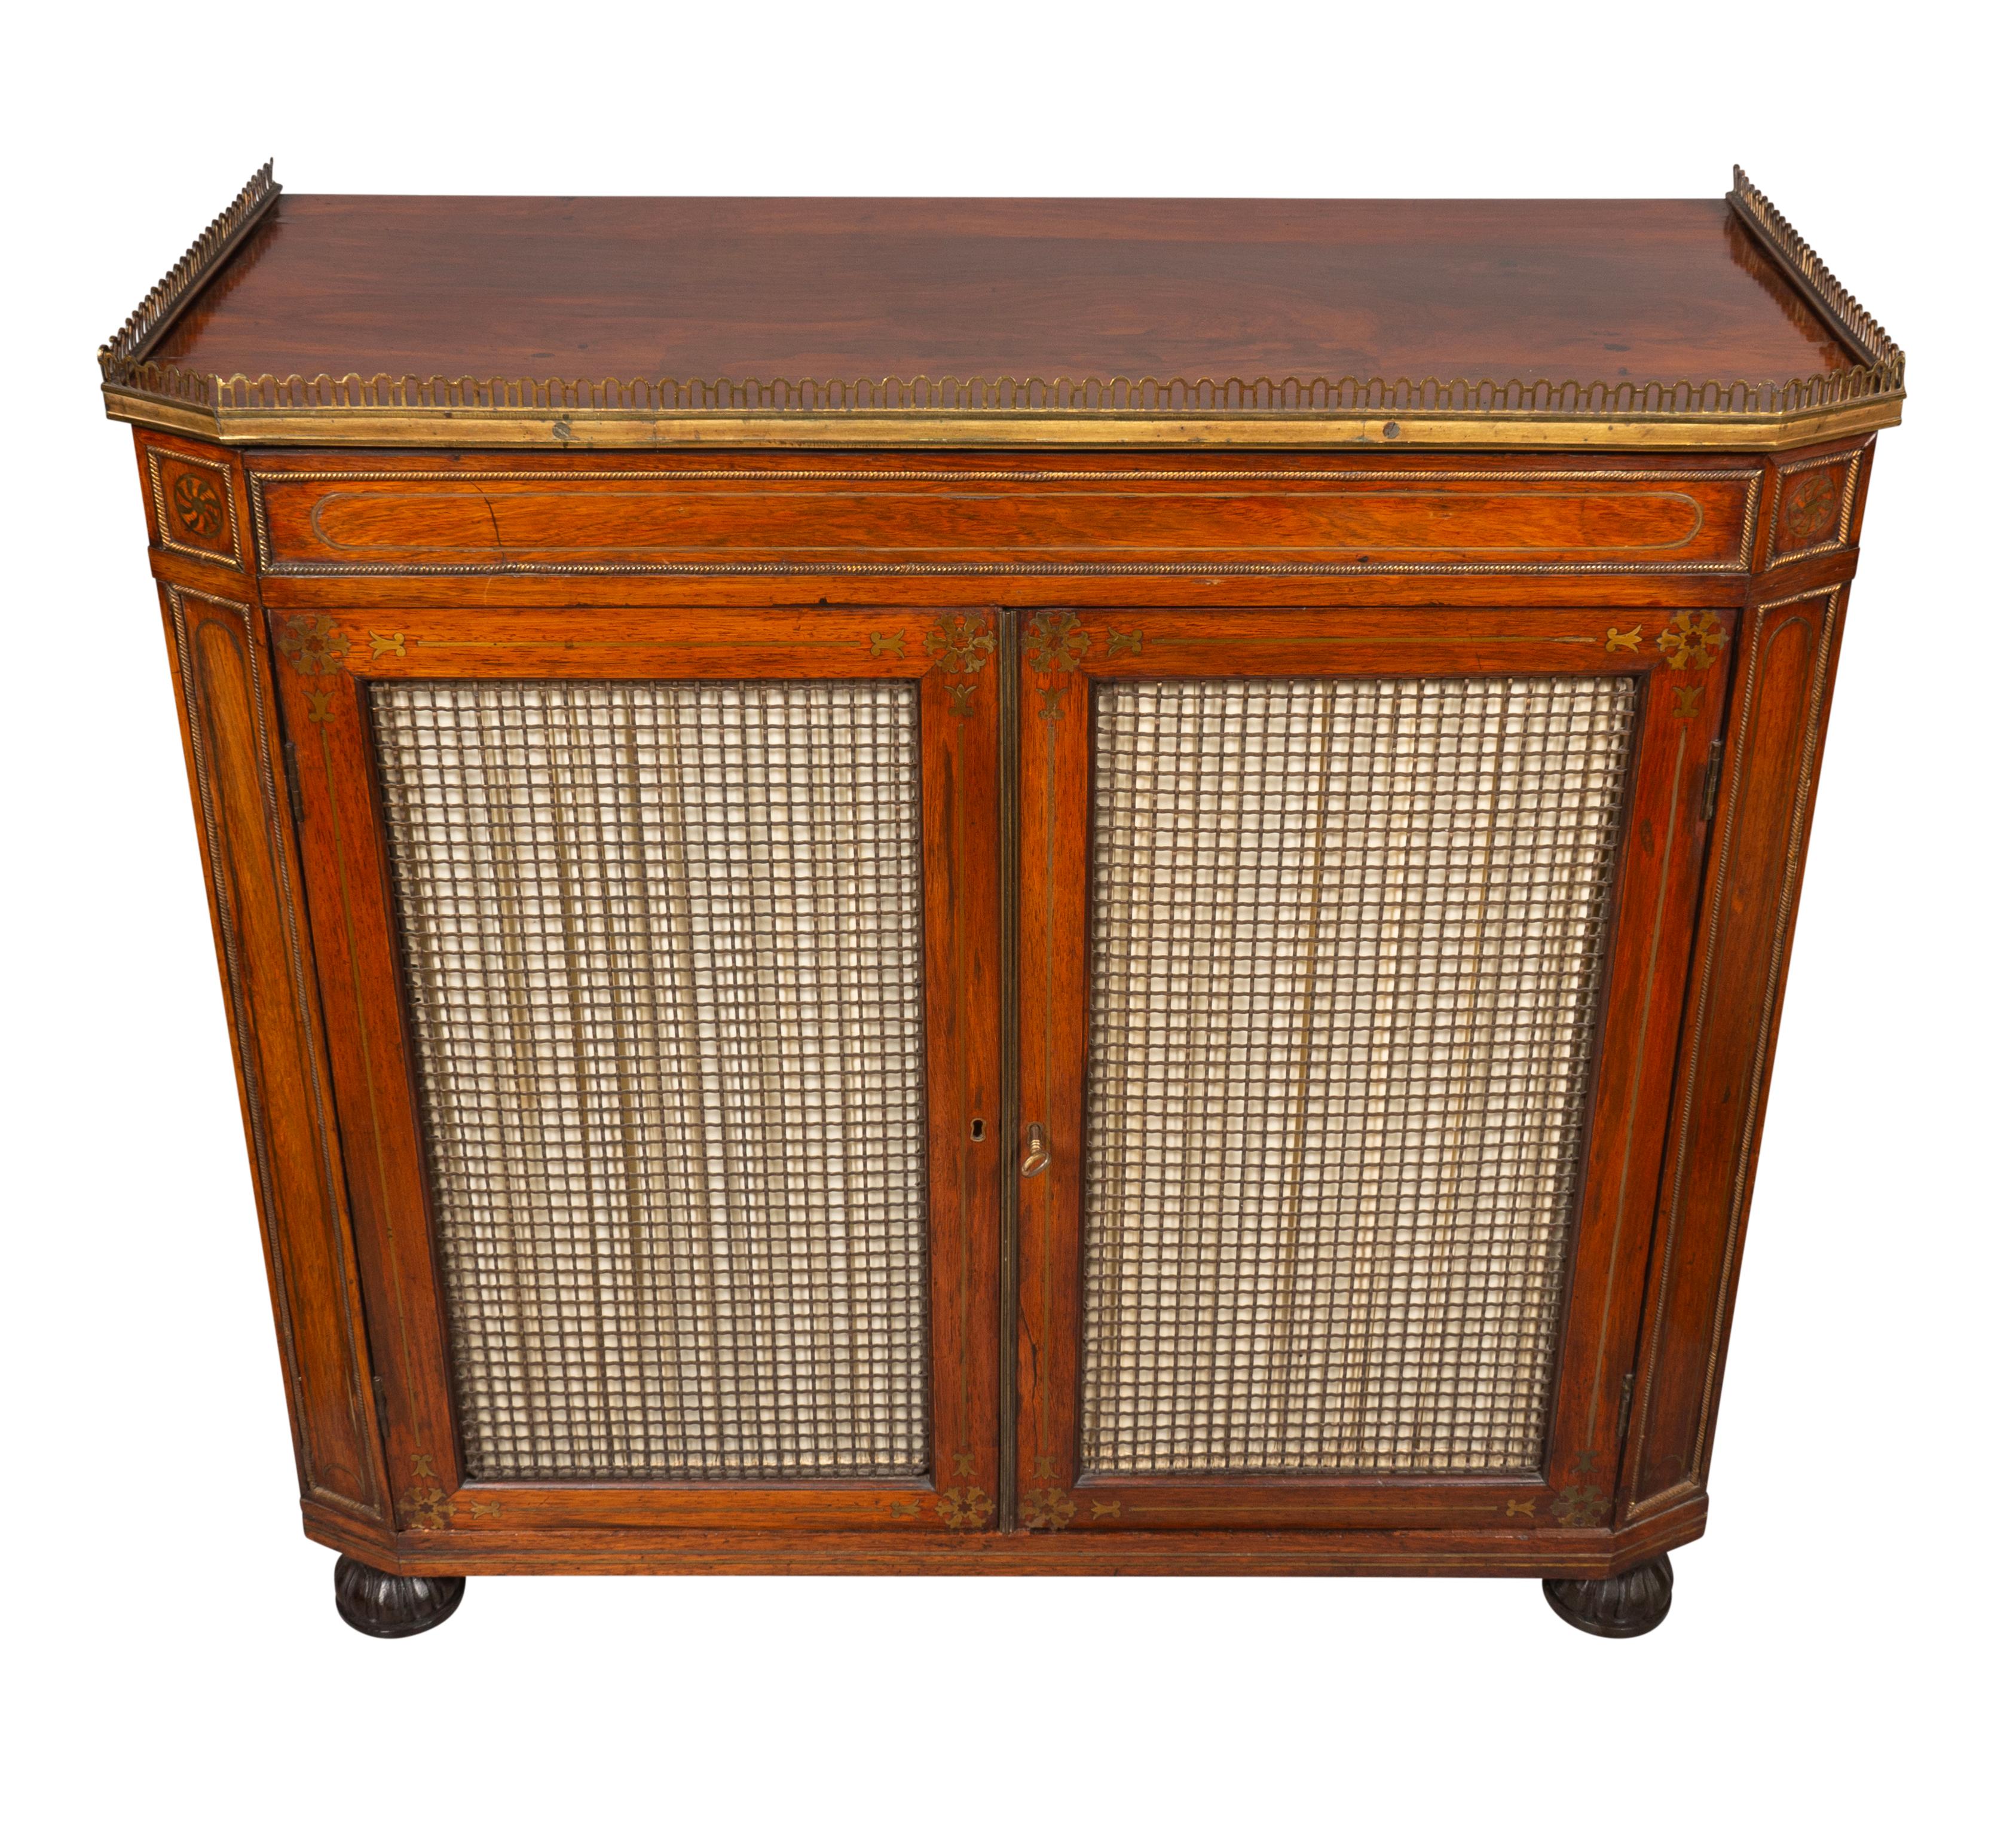 English Regency Rosewood And Brass Inlaid Credenza For Sale